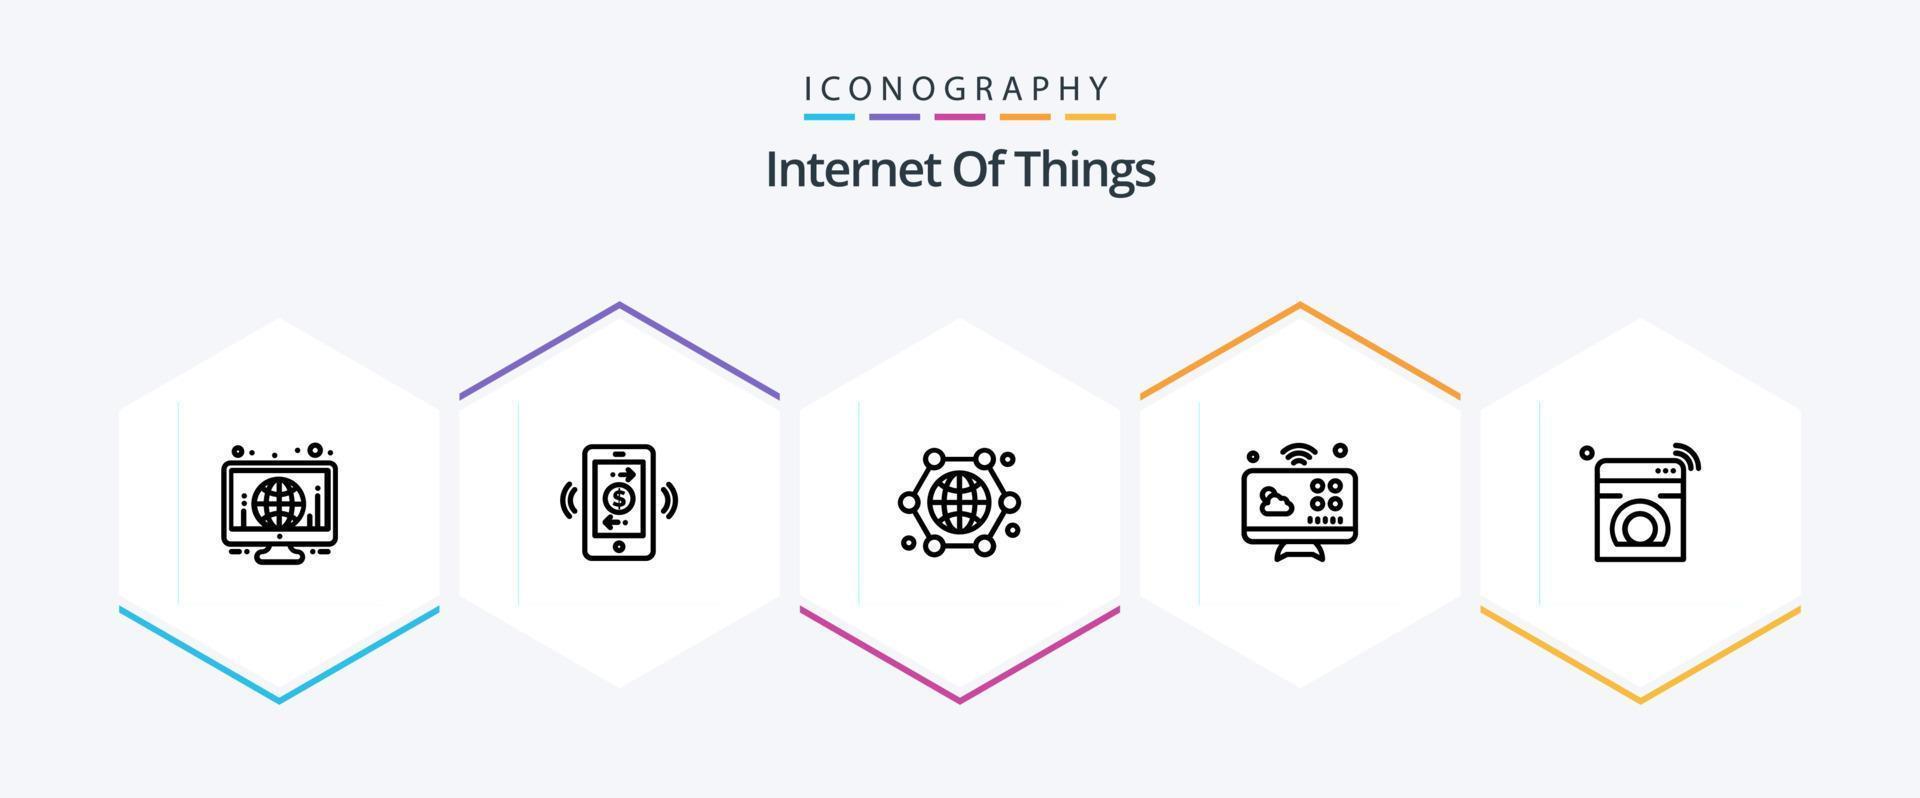 Internet Of Things 25 Line icon pack including internet. monitor. communication. connections. internet of things vector